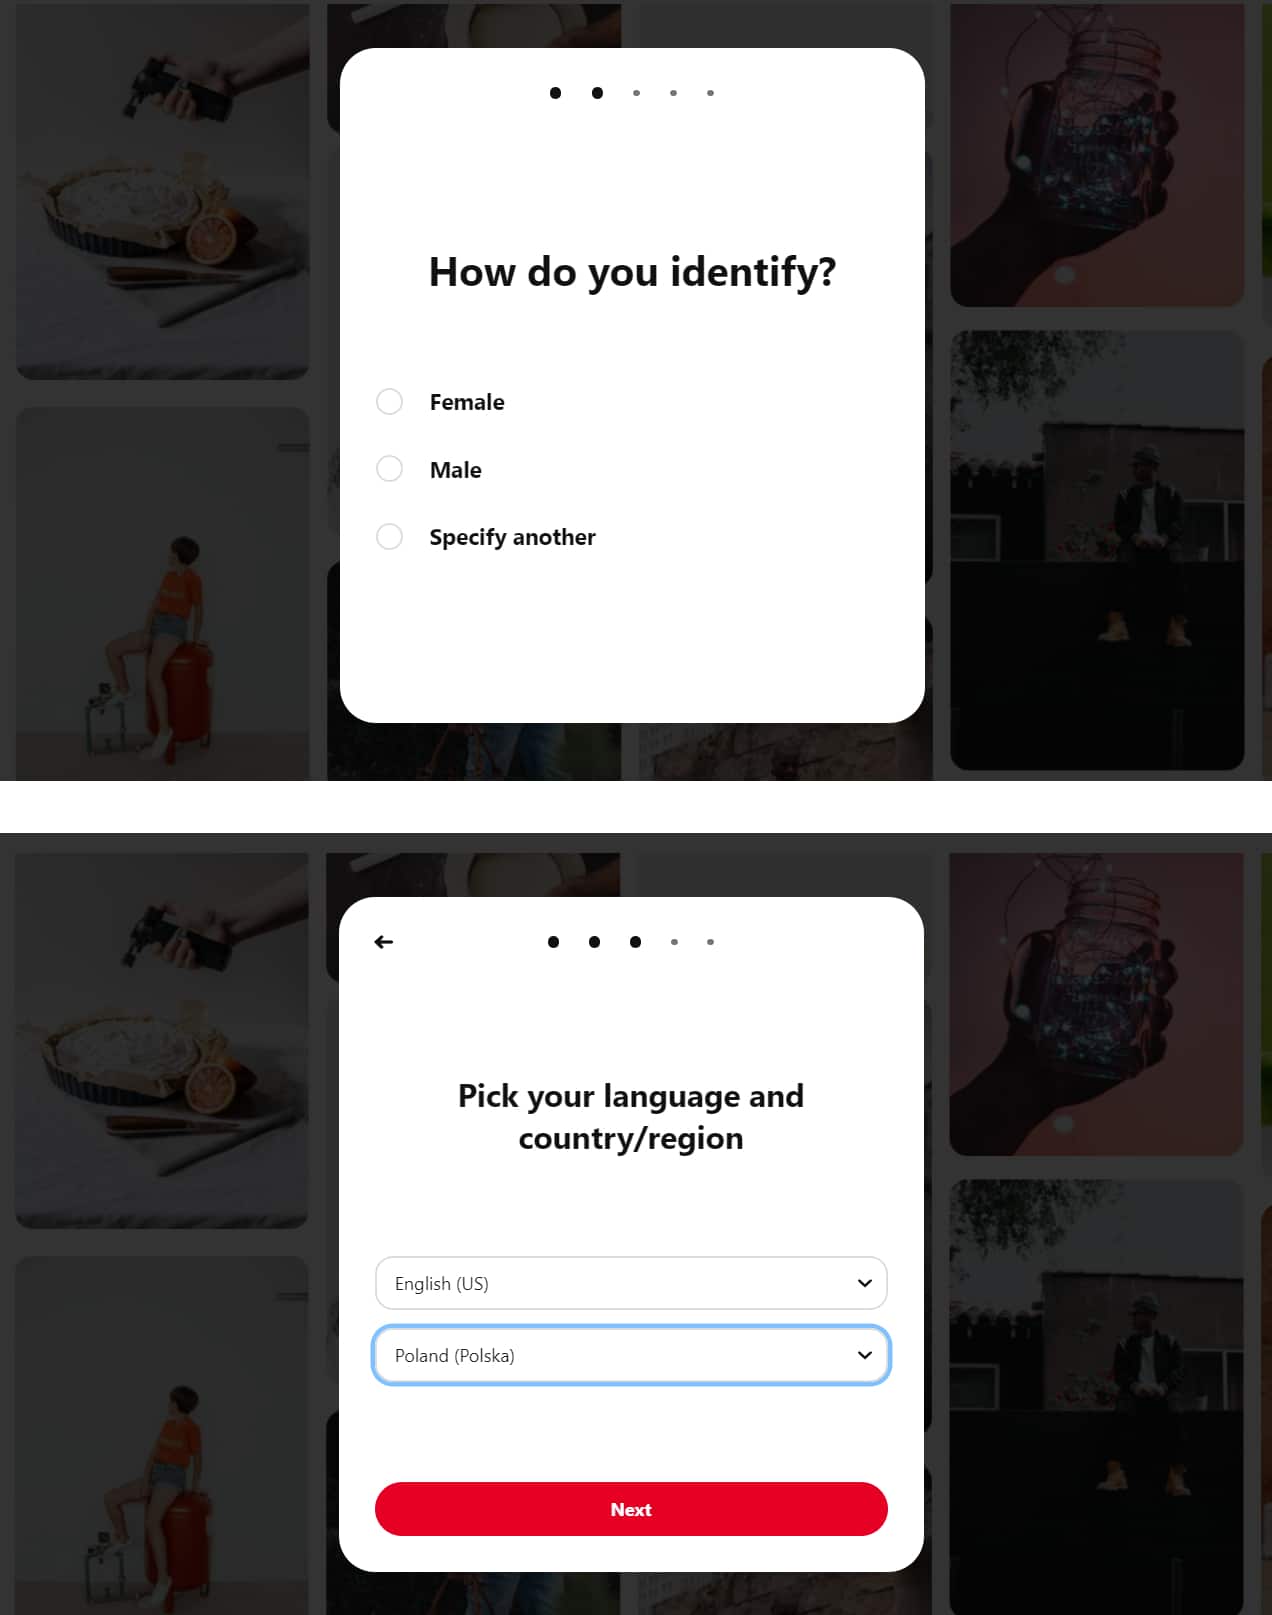 Enter your gender, language, and country in the Pinterest signup form